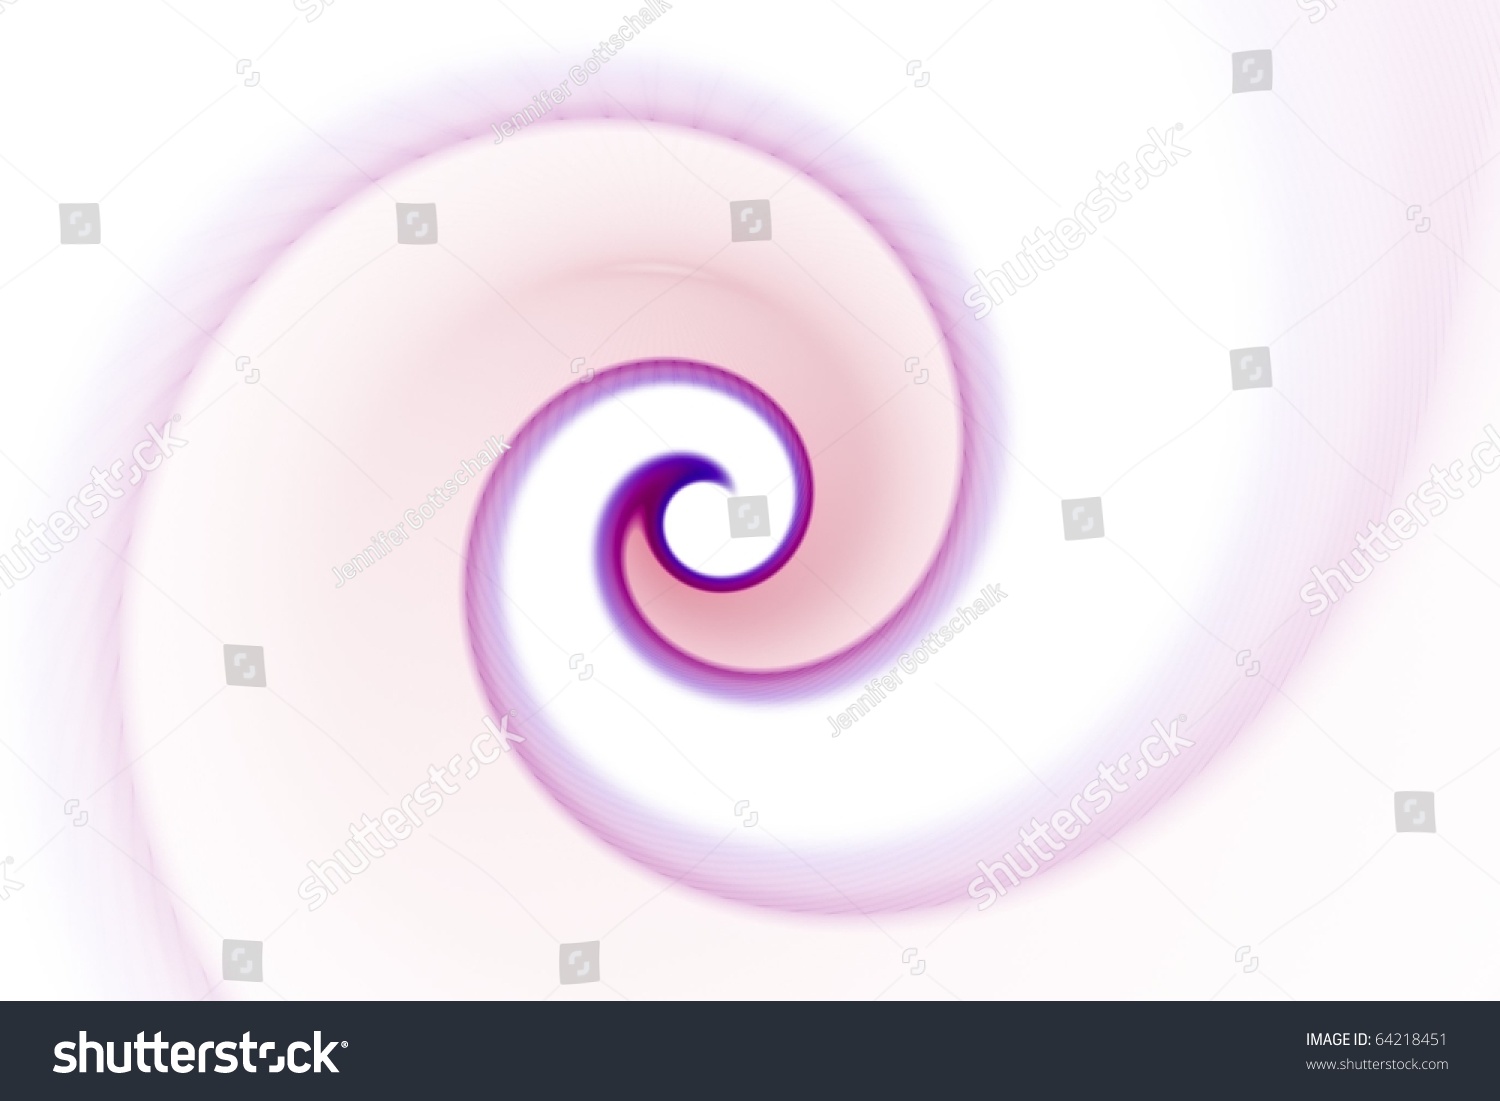 Shocking Pink And Purple Abstract Spiral On White